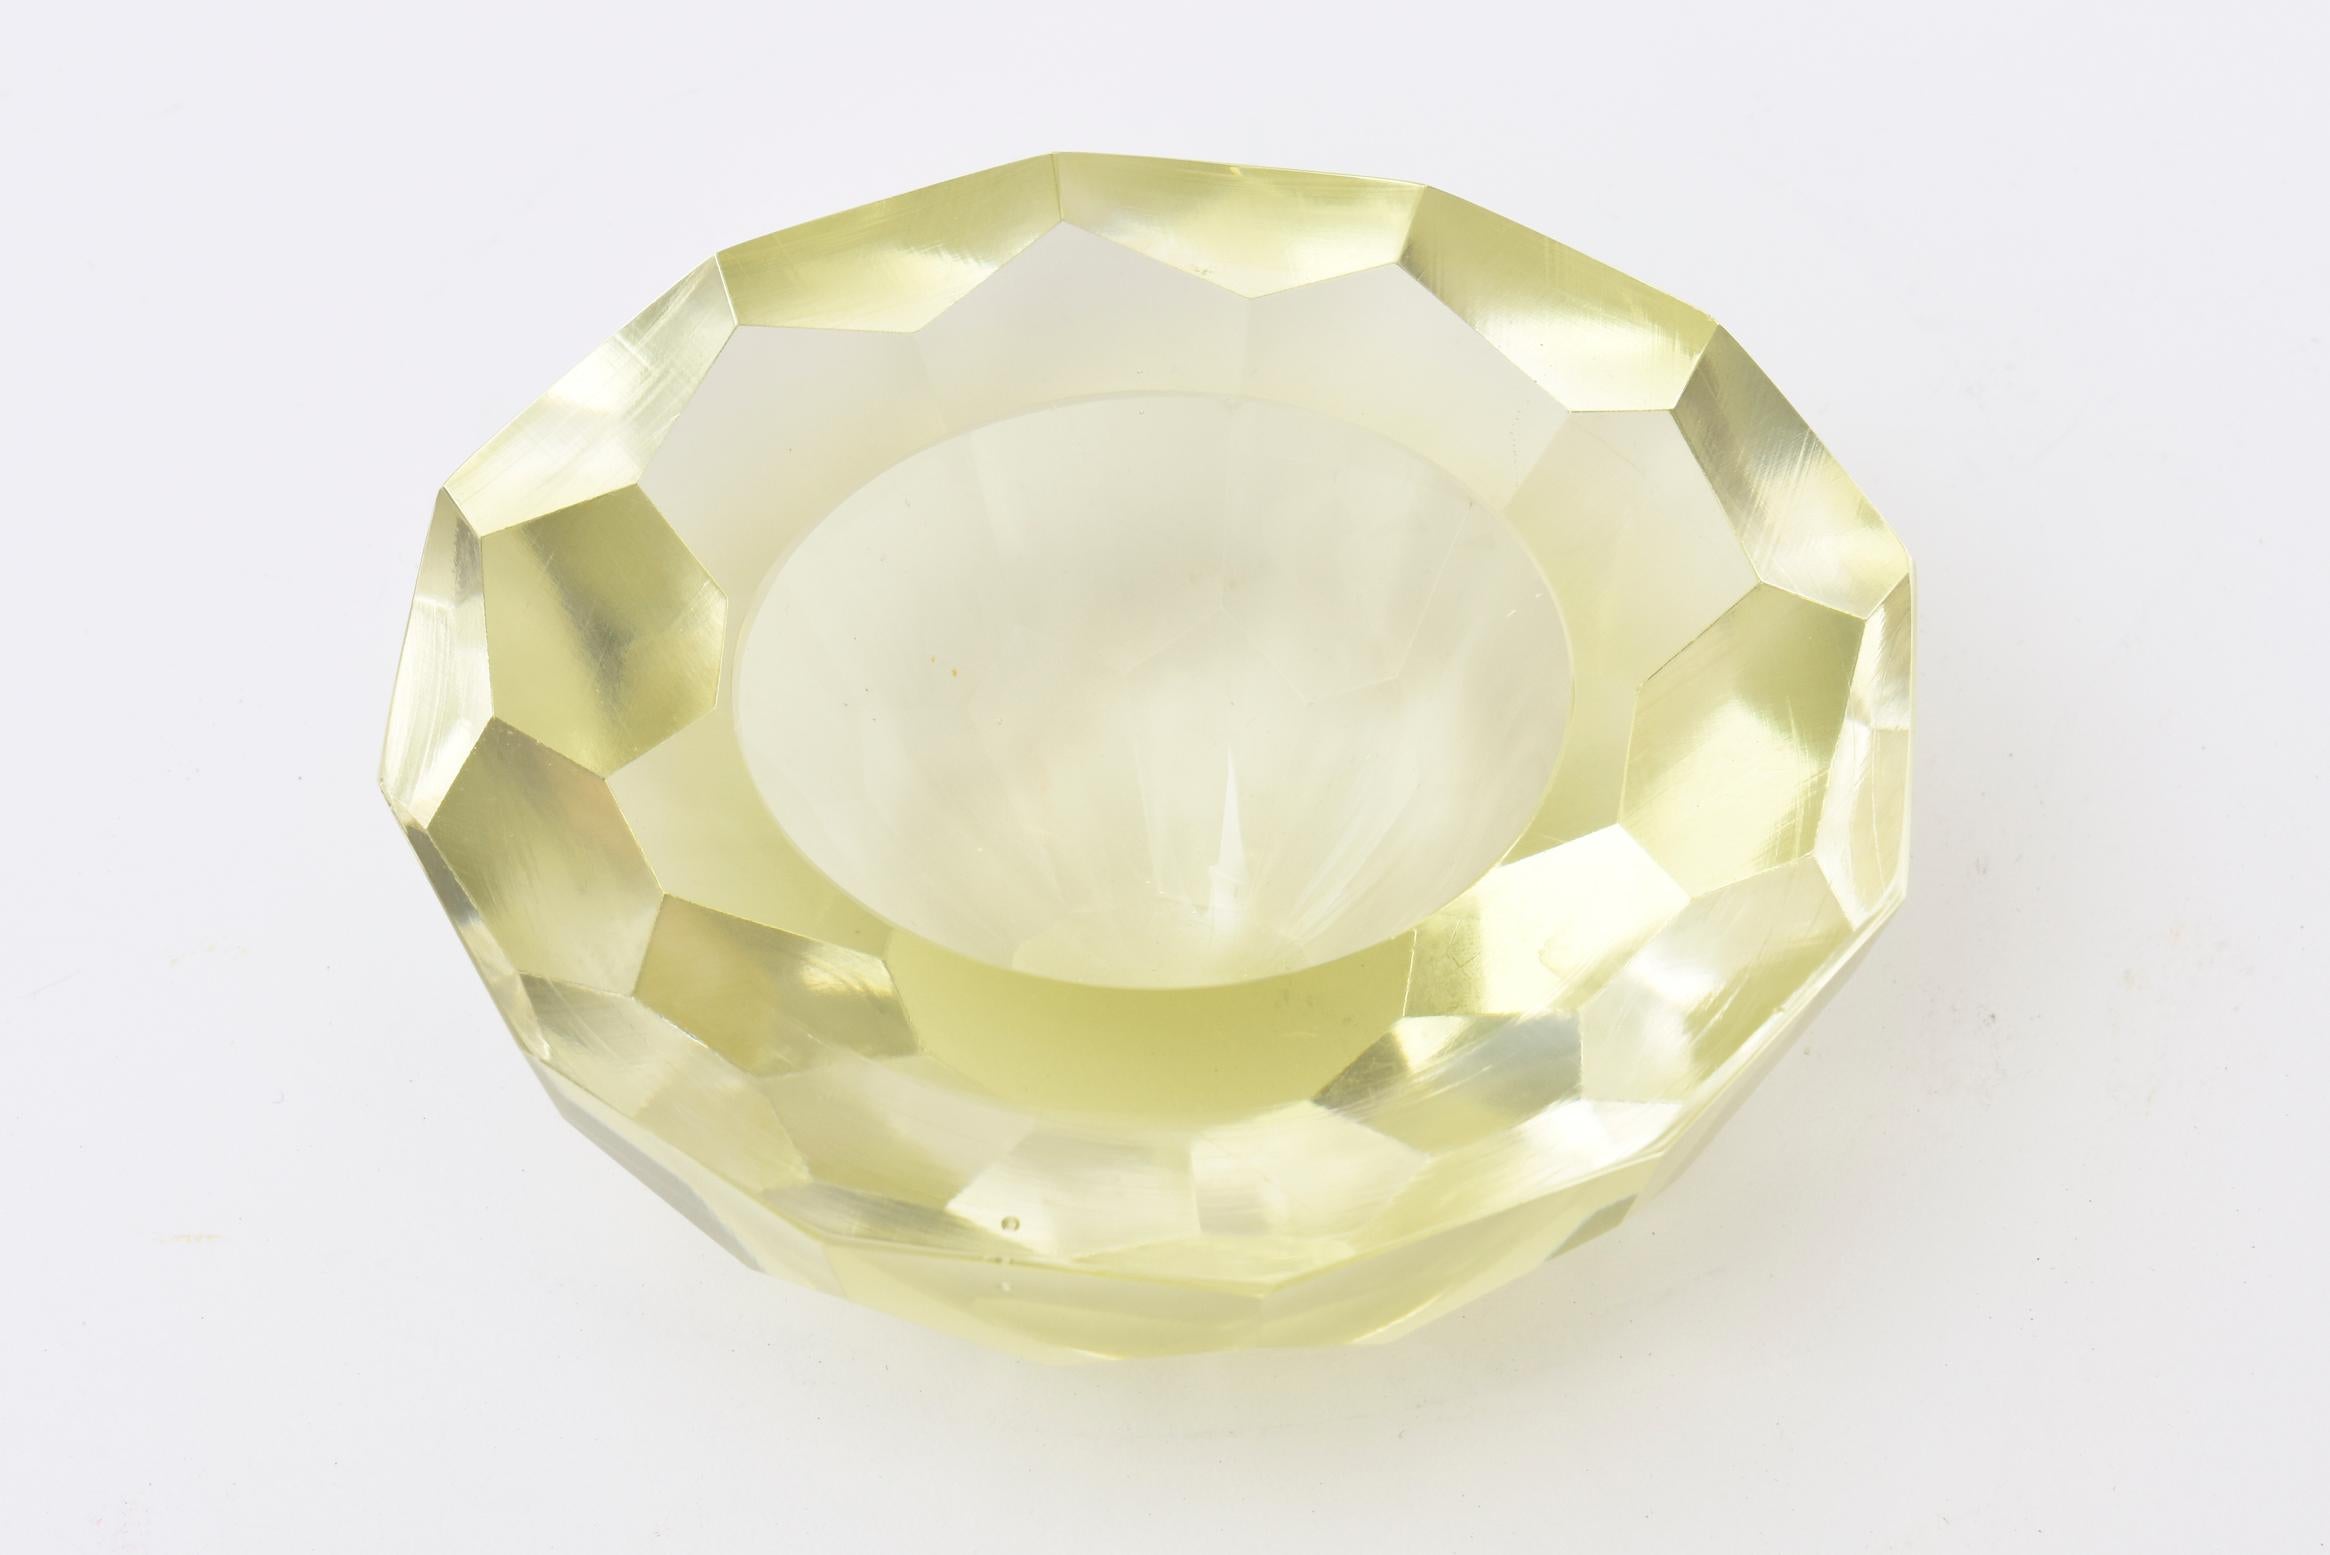 This vintage Italian Murano diamond faceted glass geode Sommerso bowl is a combination of limoncello meets citrine. It is a gem and jewel of a stunning Murano bowl. This is a most unusual color for these kind of gorgeous bowls. It has the flat cut